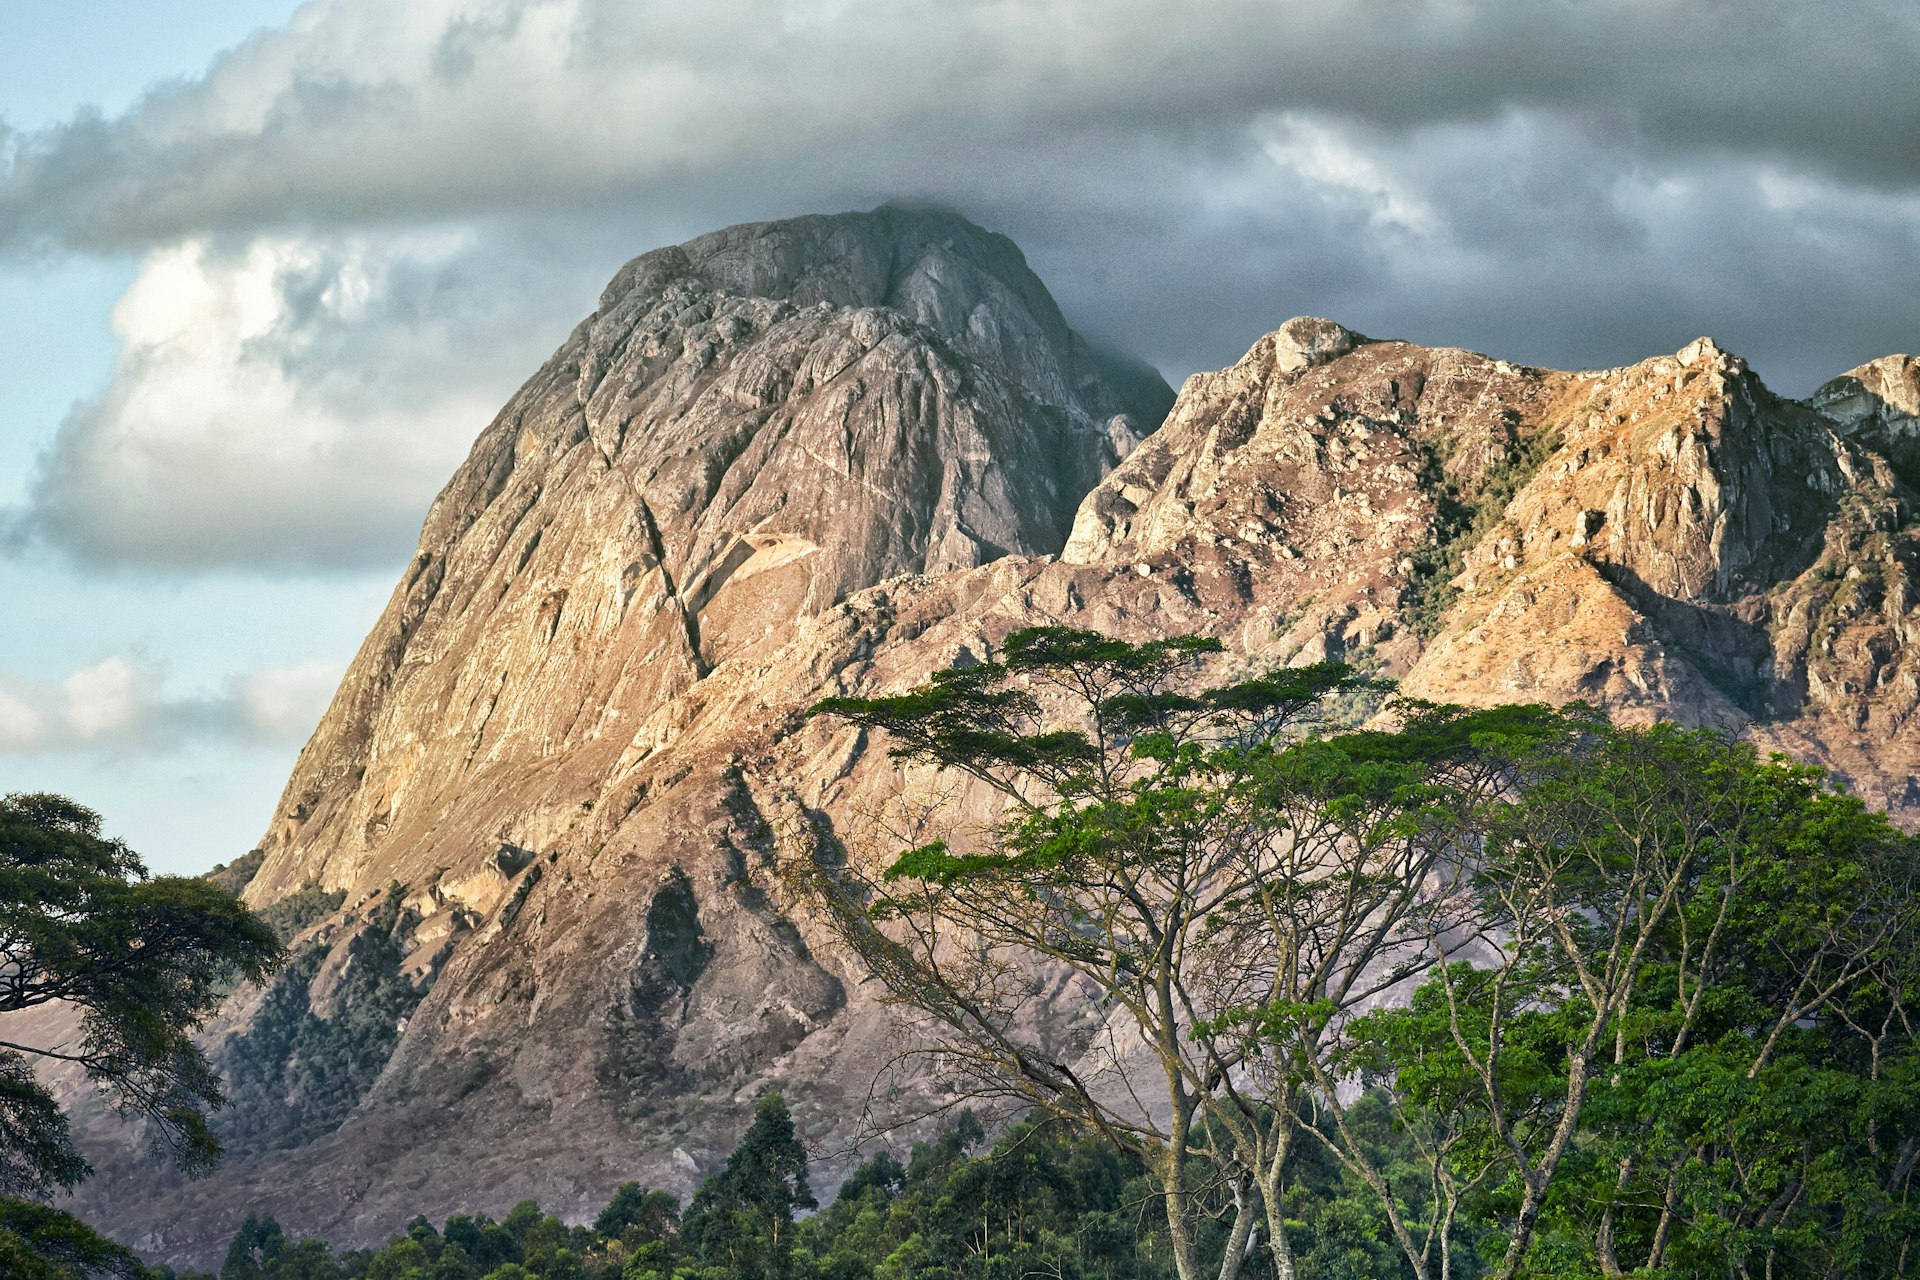 Clouds cling to the rocky outcrops of Mulanje Mountain, which towers about a forest